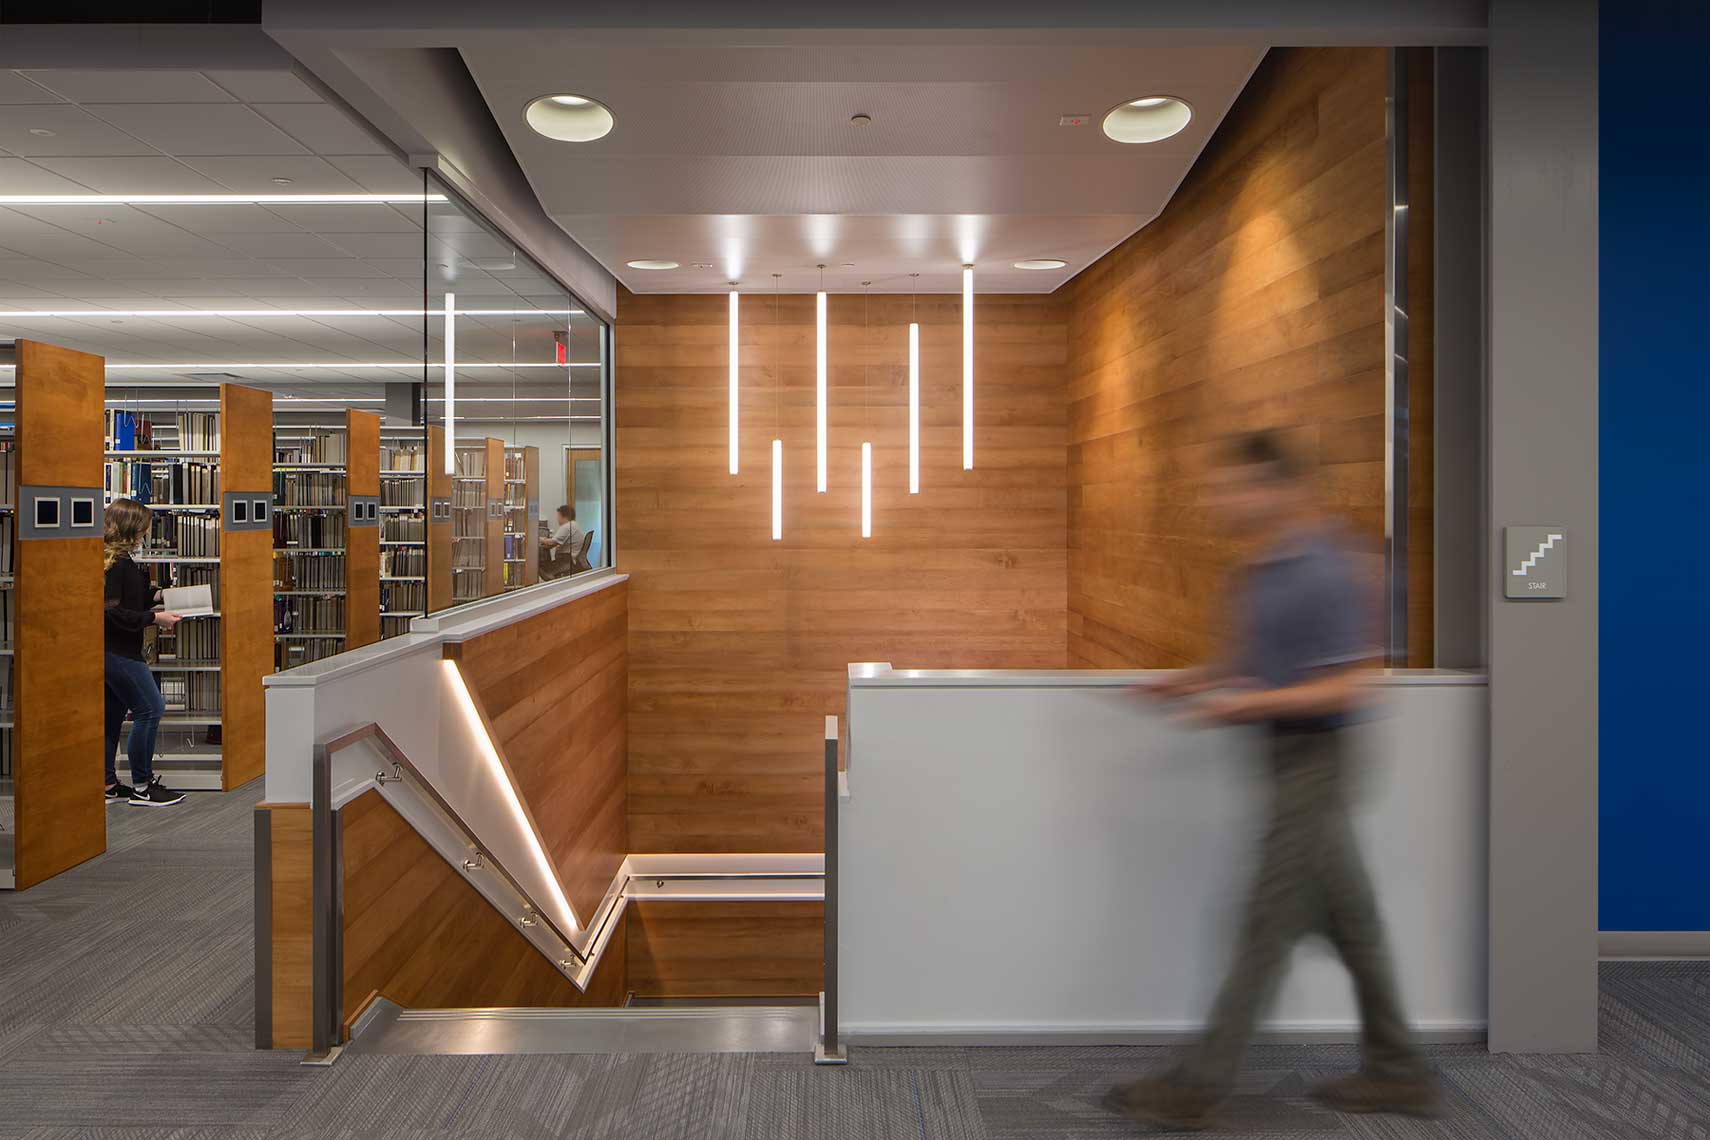 Midlands Tech | Beltline Campus Learning Resource Center - Stairway<br>Quackenbush Architects + Planners / Ratio / Randolph Builders